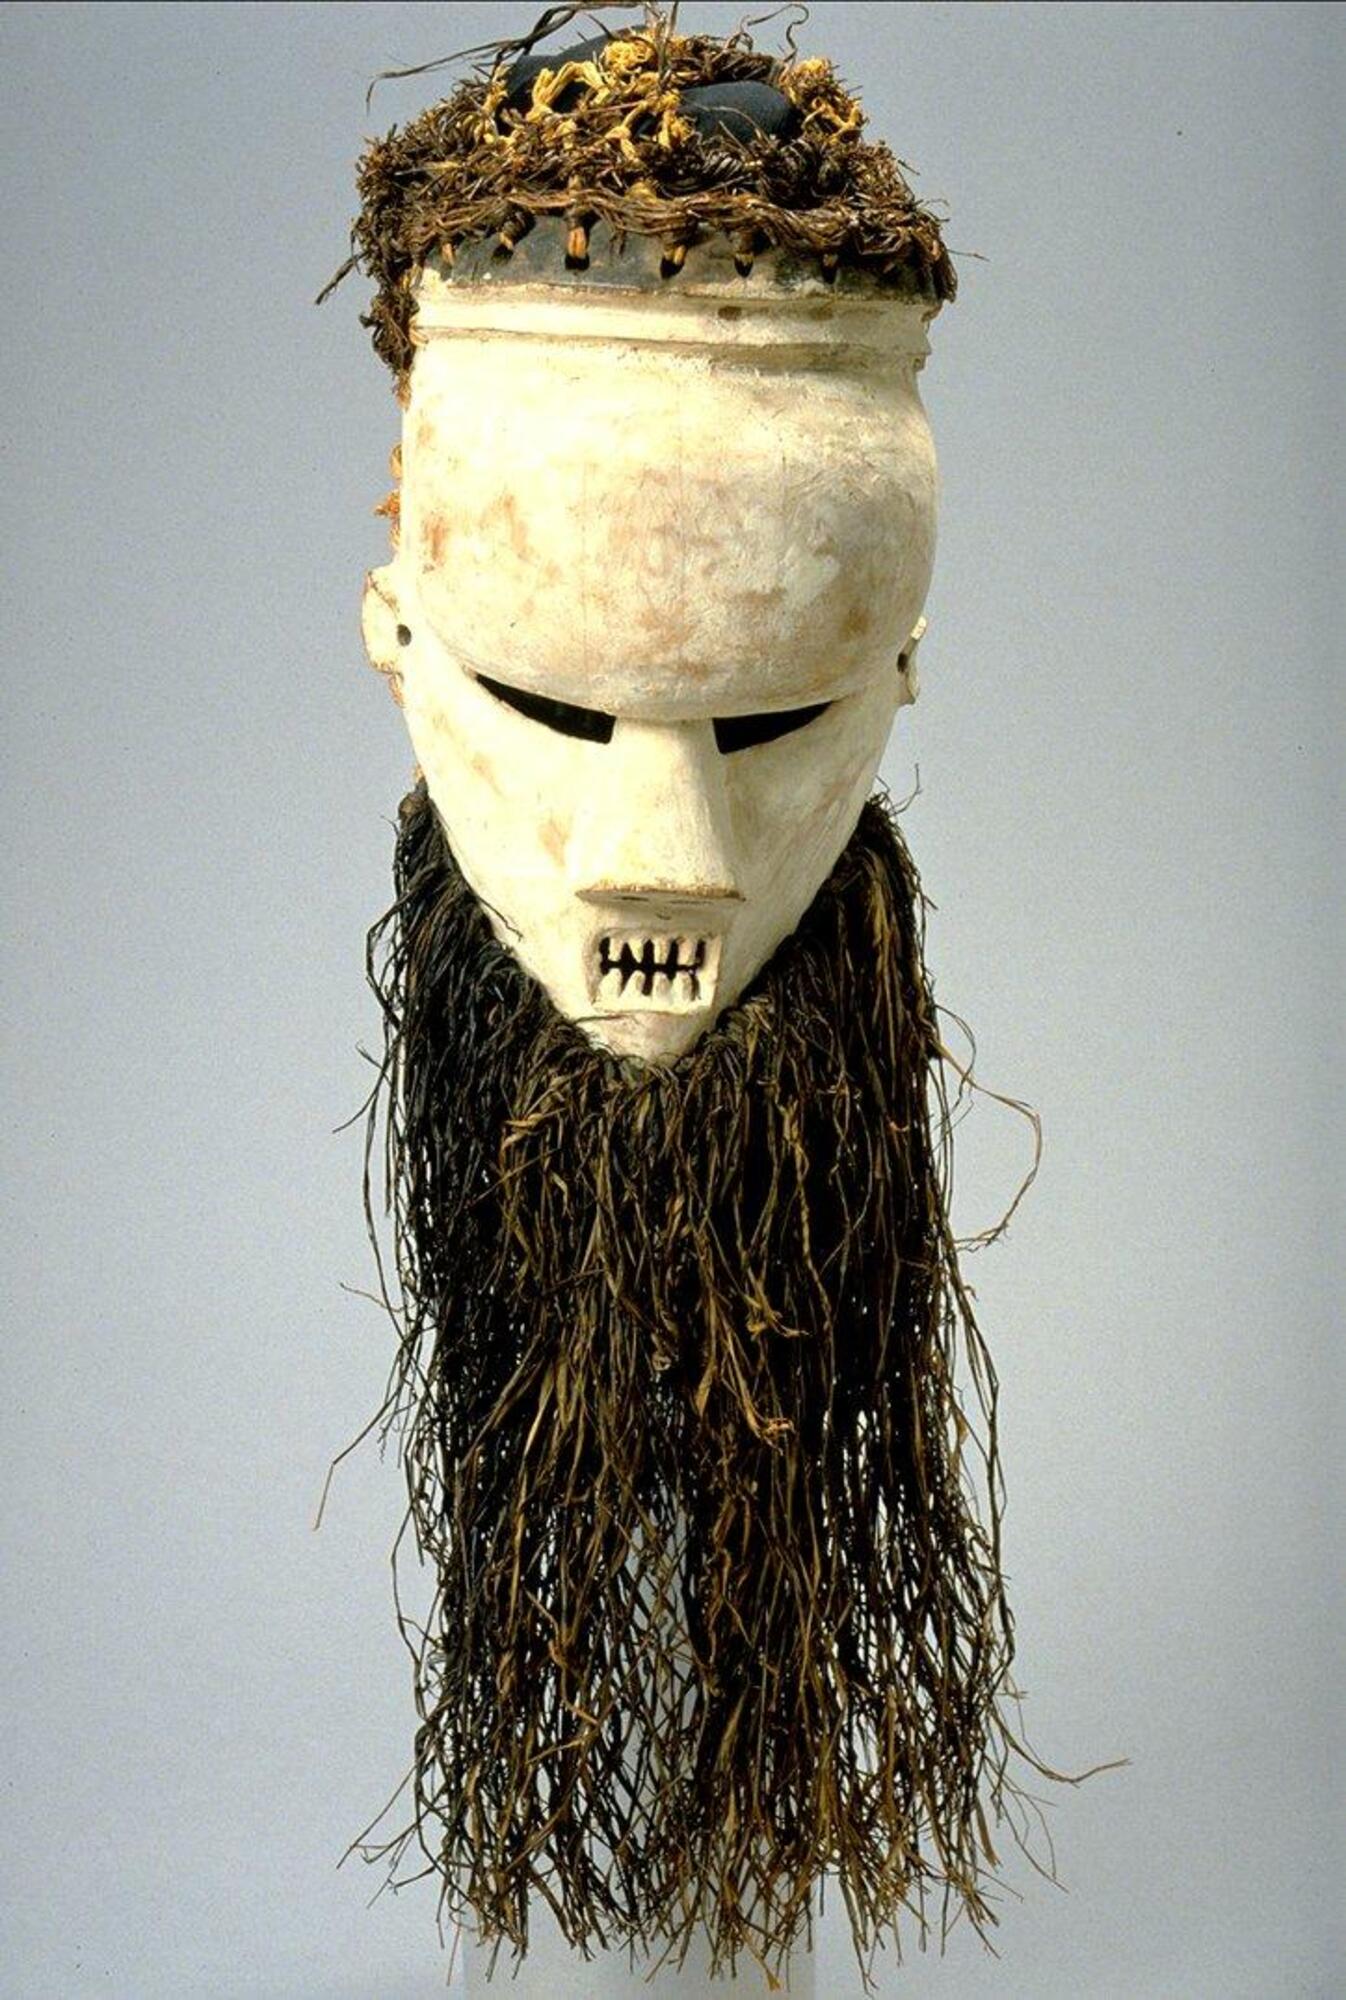 Face mask made of wood, covered in white kaolin; face has round, bulging forehead, deep set narrow eyes, small round ears, fiber beard, open rectangular mouth and pointed teeth; basketry weave that held mask on the dancer’s head is visible at back and sides; raffia attachment on top of head frayed and missing.<br />